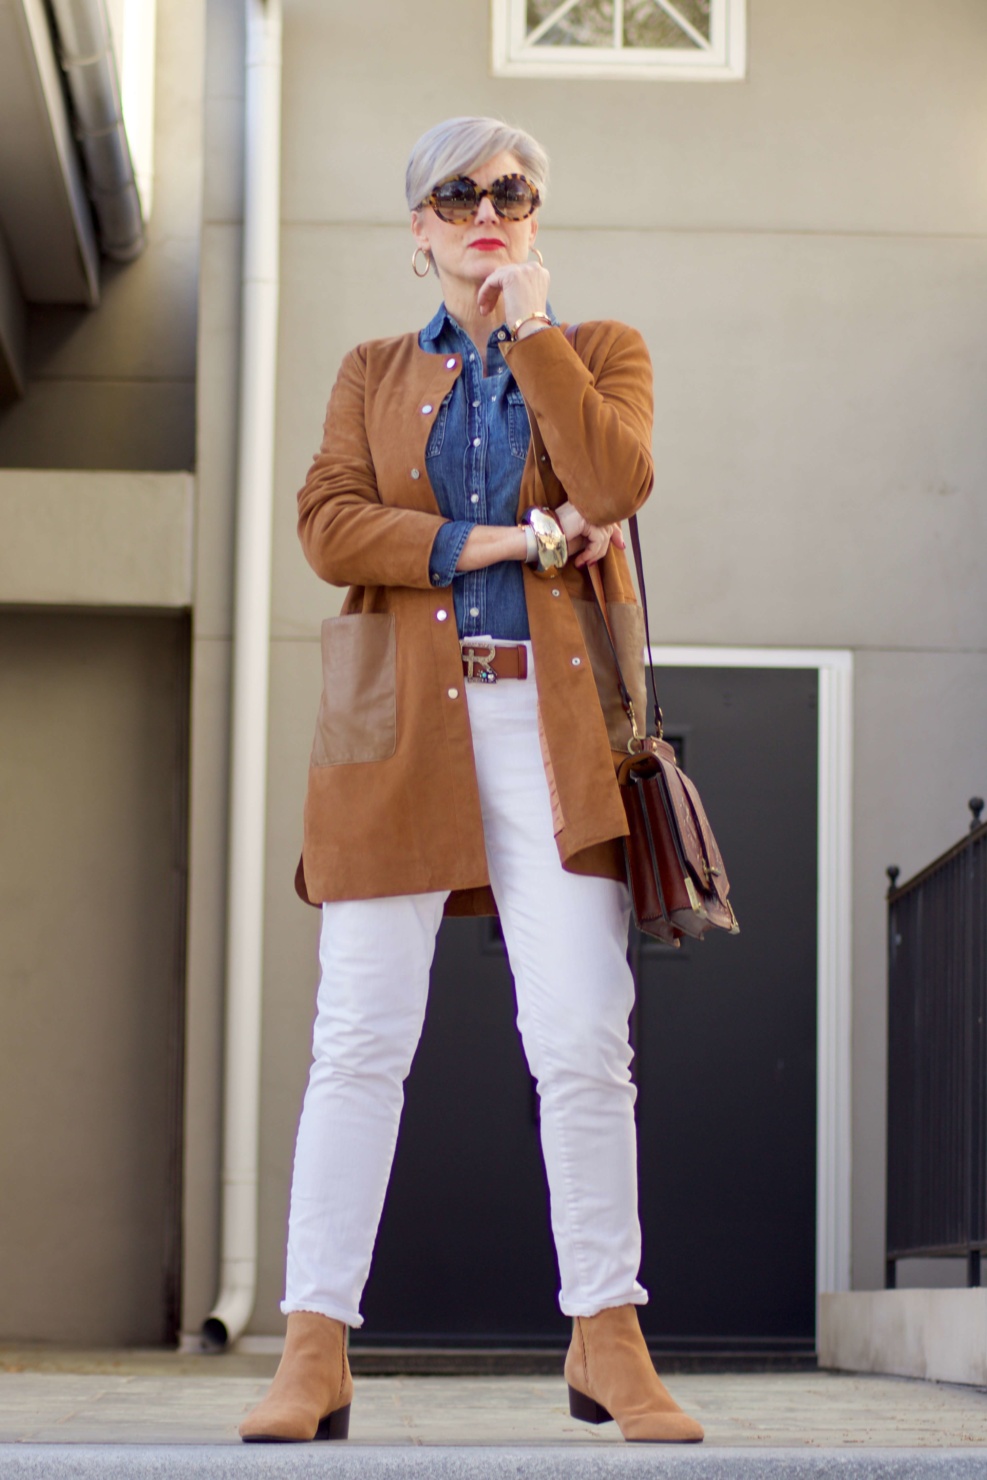 beth from Style at a Certain Age wears white denim, chambray shirt, suede jacket and booties